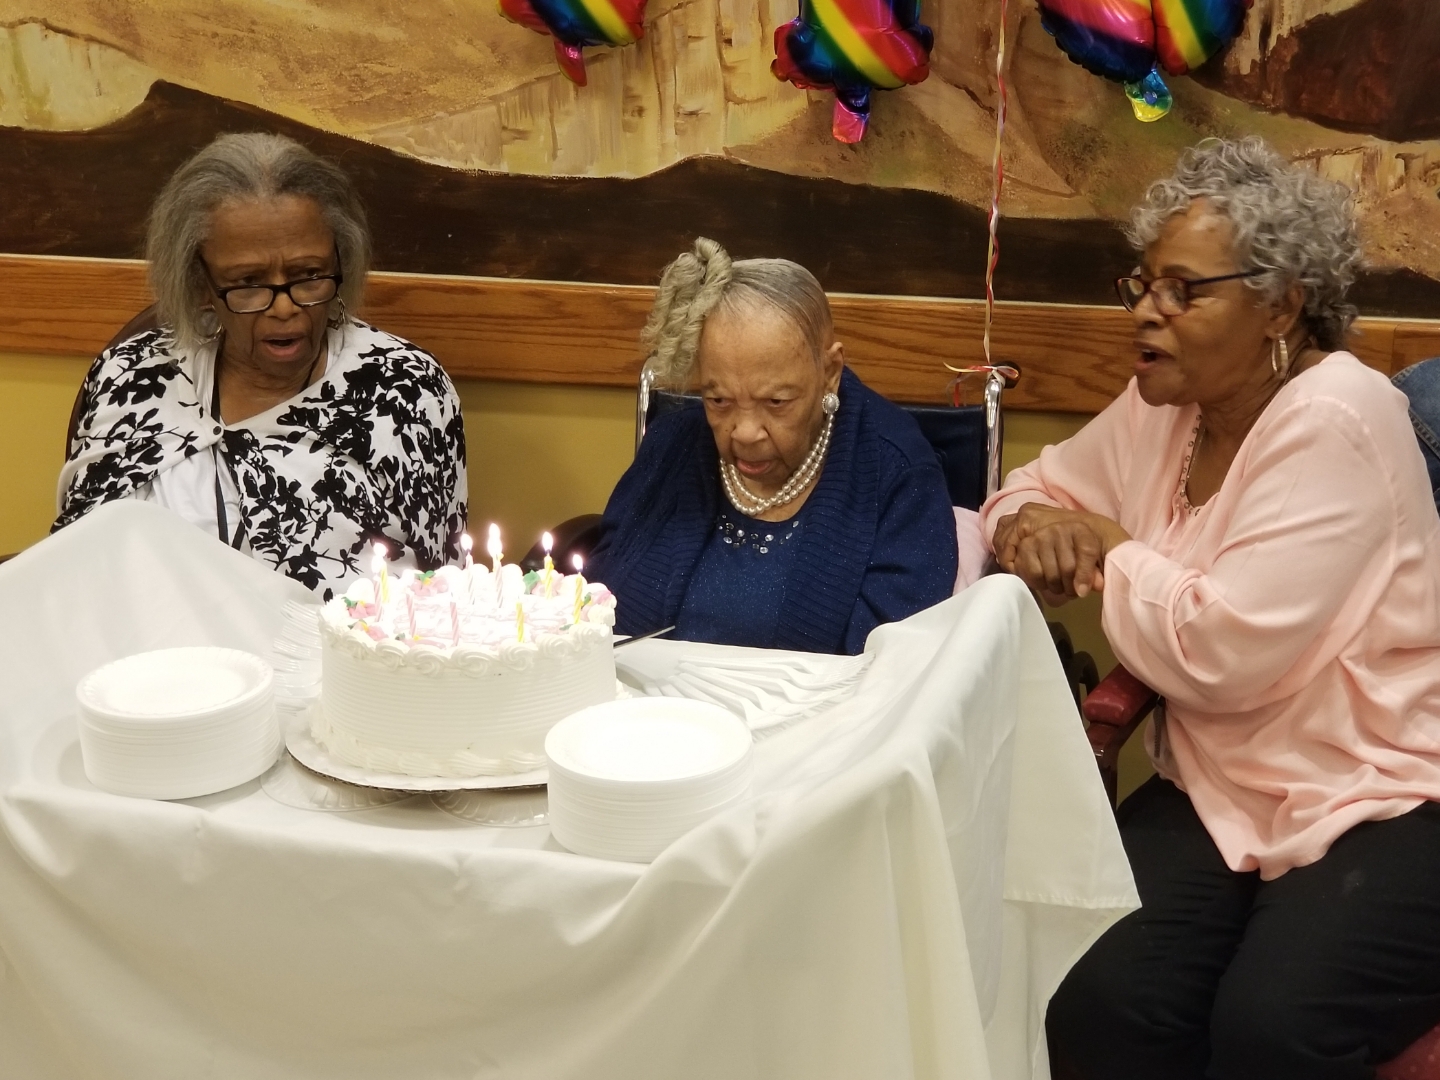 On her 110th birthday. (Source: Peace Care NJ)